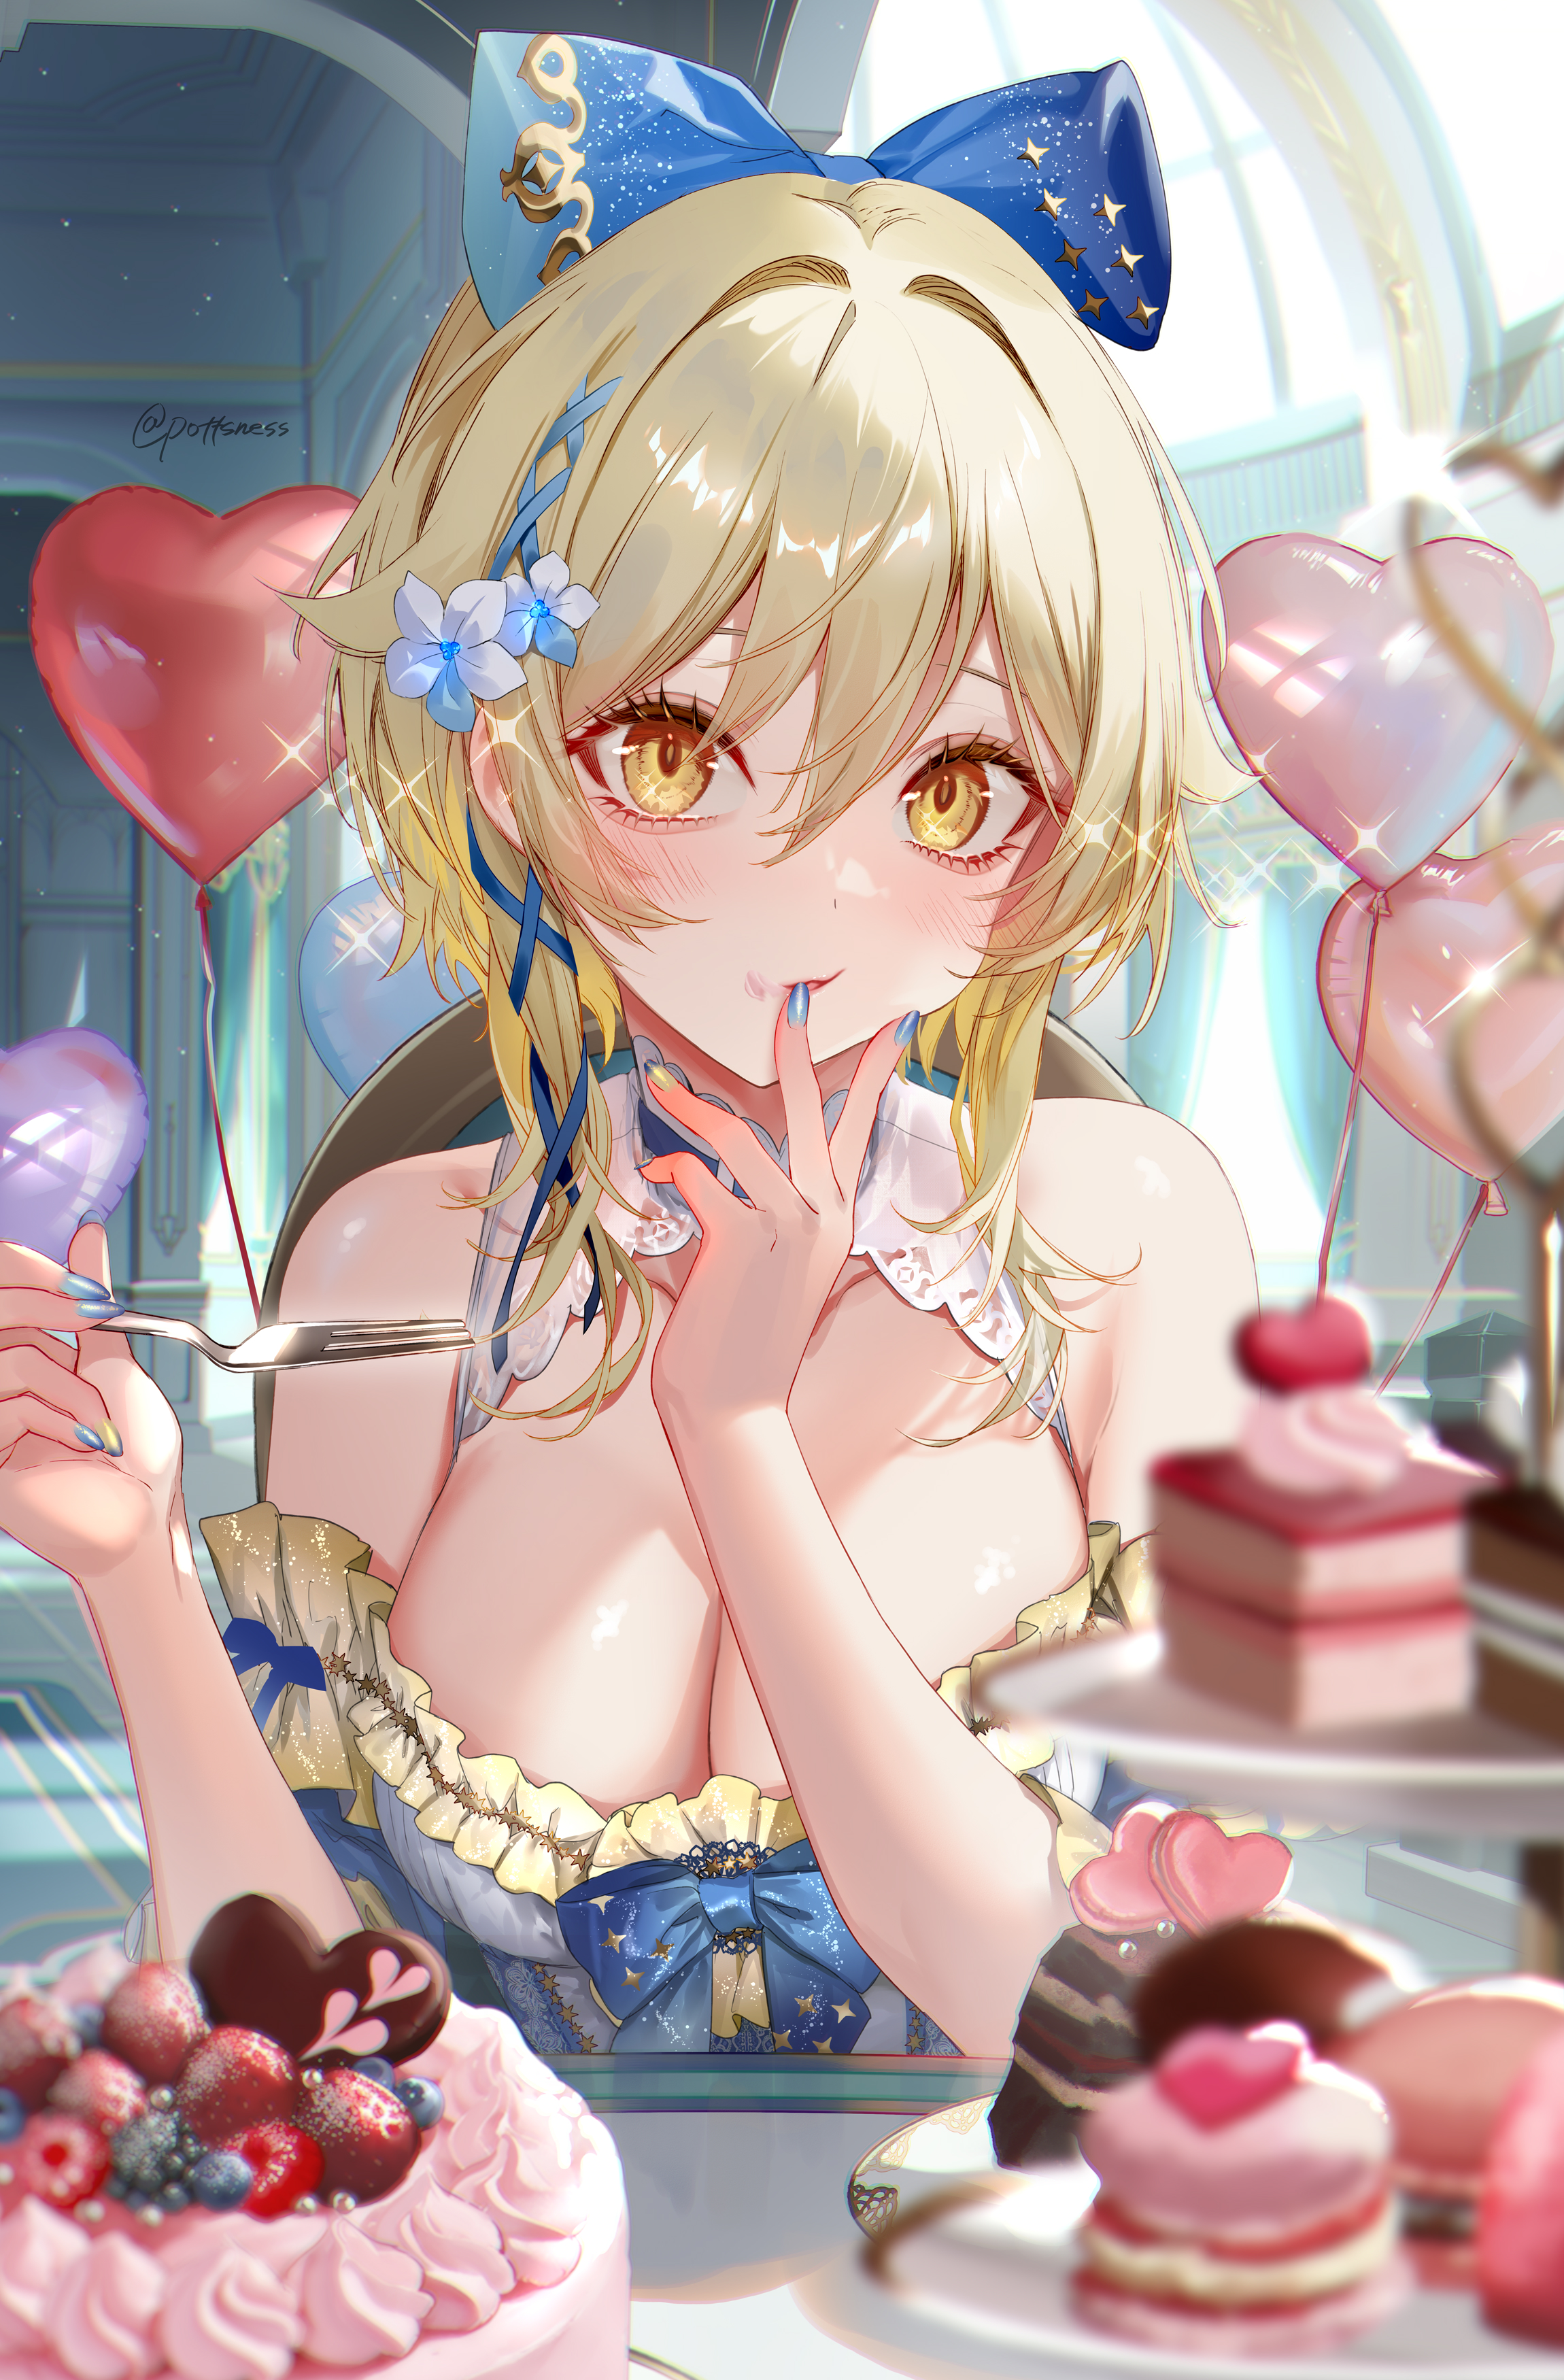 Anime 2300x3500 Genshin Impact artwork Lumine (Genshin Impact) blonde yellow eyes flower in hair cleavage big boobs colored nails finger in mouth balloon cake Pottsness portrait display anime girls anime hair between eyes bare shoulders sweets long hair painted nails blue nails sitting fork chair fruit strawberries blueberries sparkles watermarked looking at viewer bright hair ribbon plates